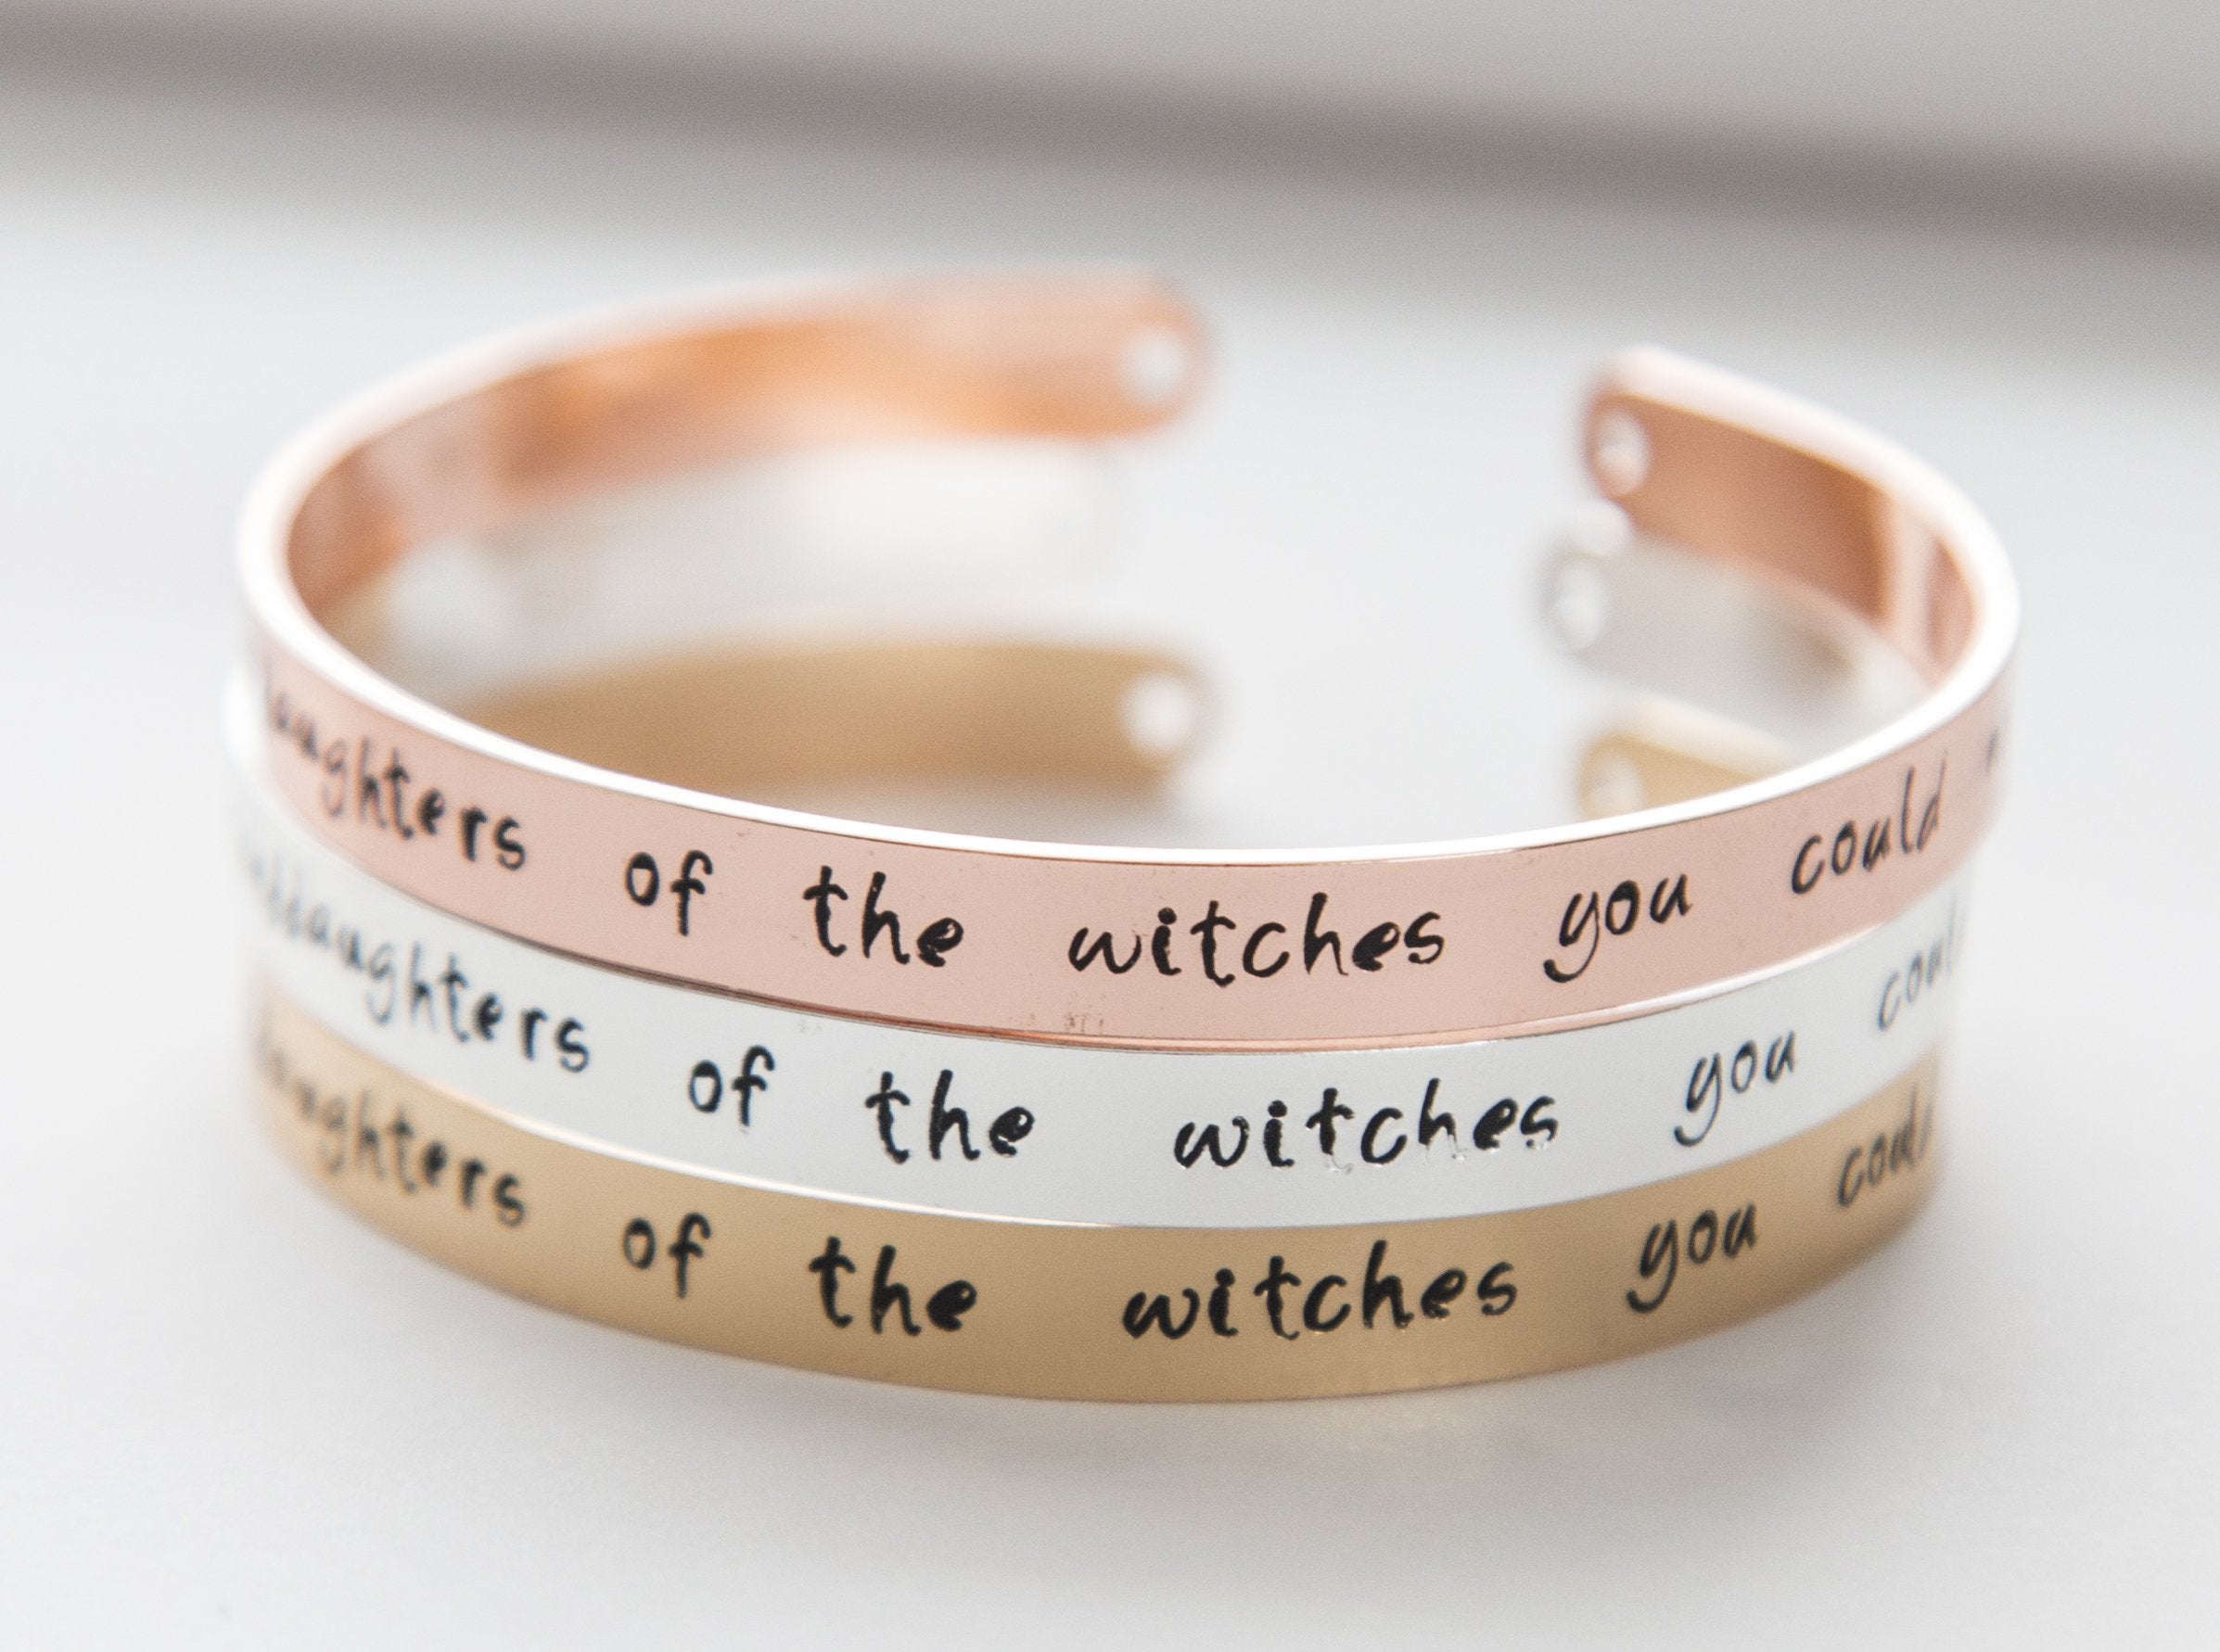 Hand-Stamped Feminist Bracelet: "We Are the Granddaughters of the Witches" - Adjustable Copper with Rose Gold, Gold or Silver Plating - Jewelry & Watches - Bijou Her -  -  - 